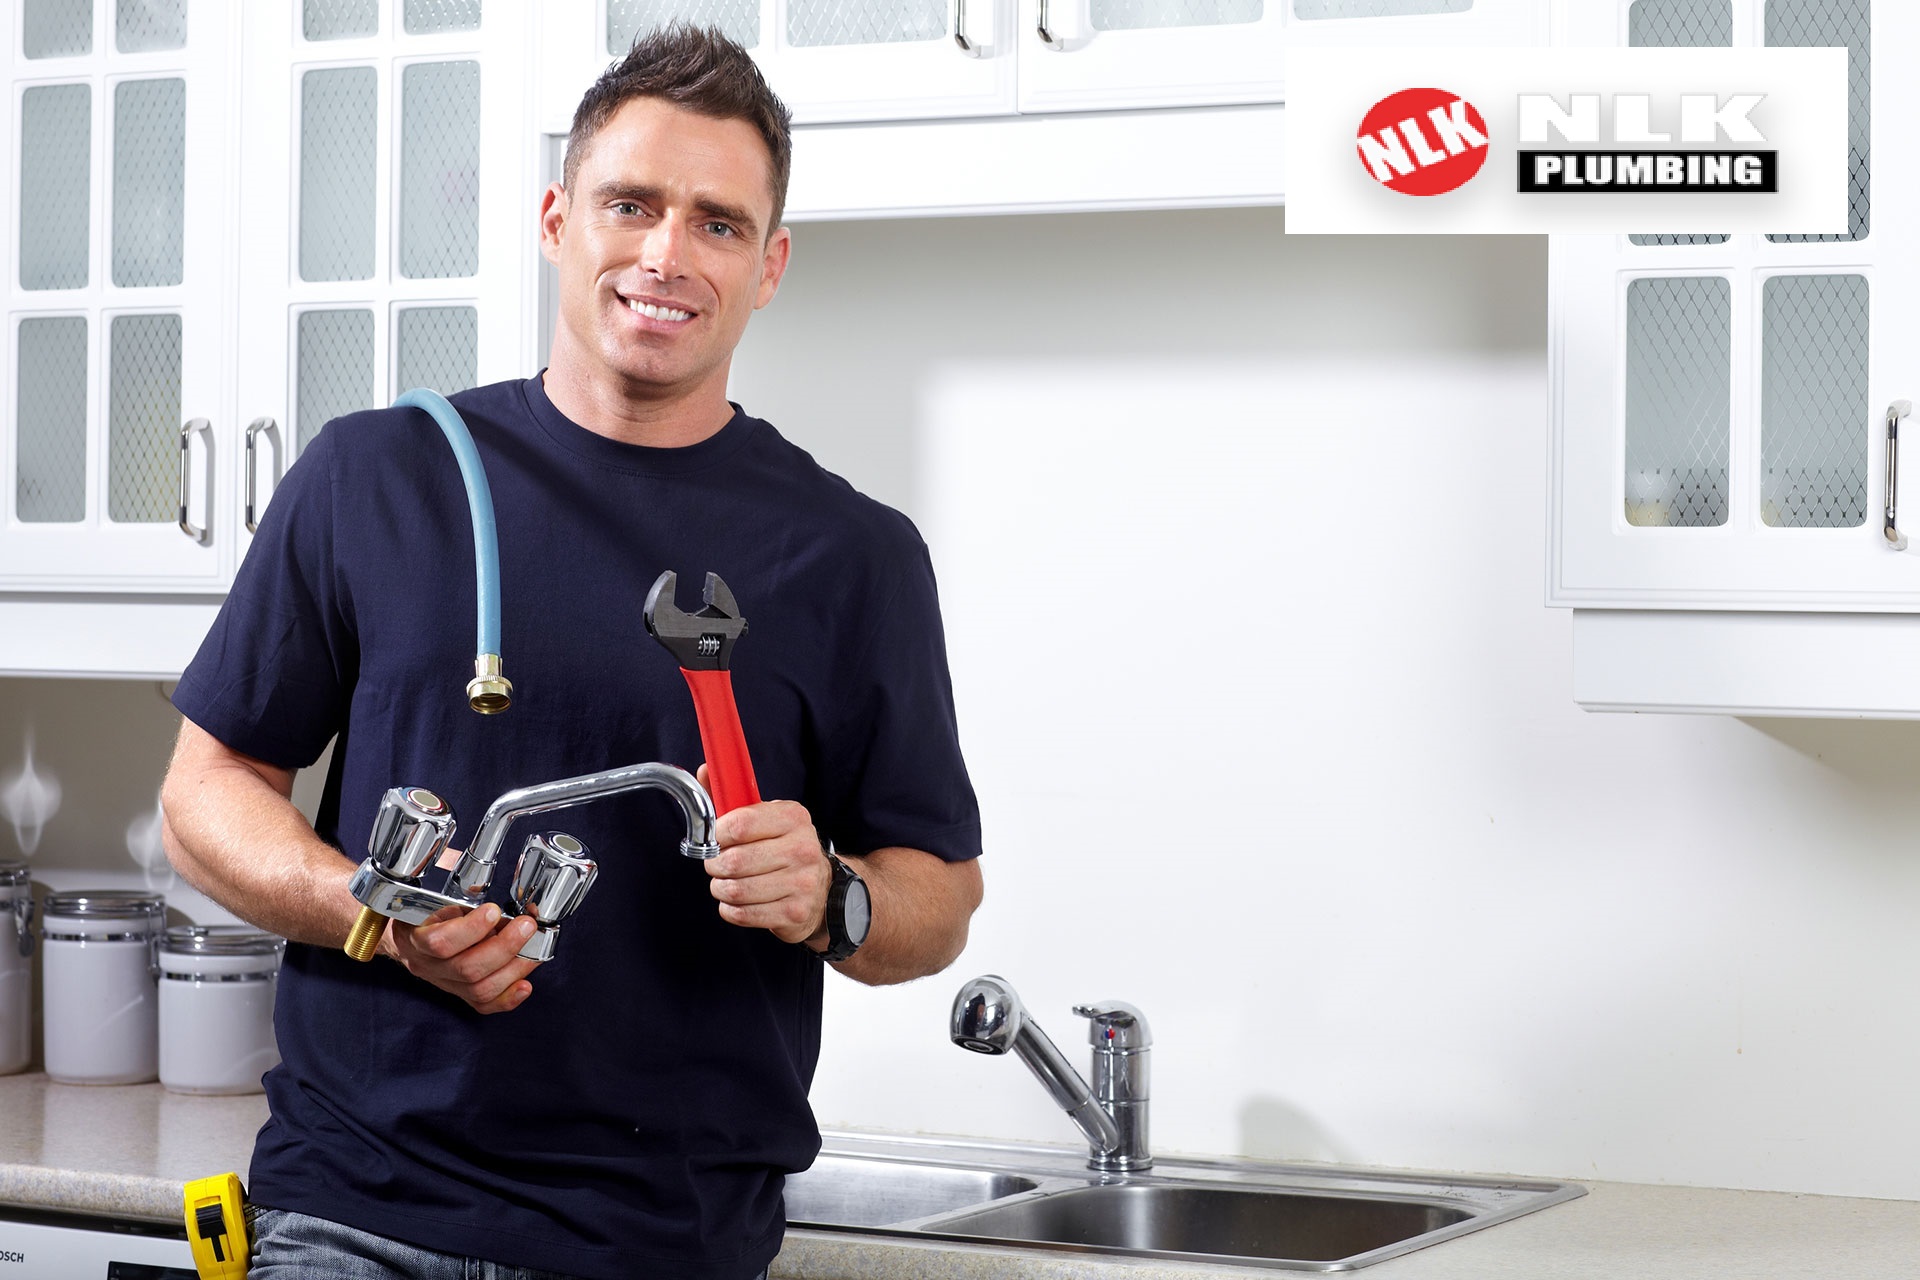 Hire Expert Plumber If You Notice Low Water Pressure